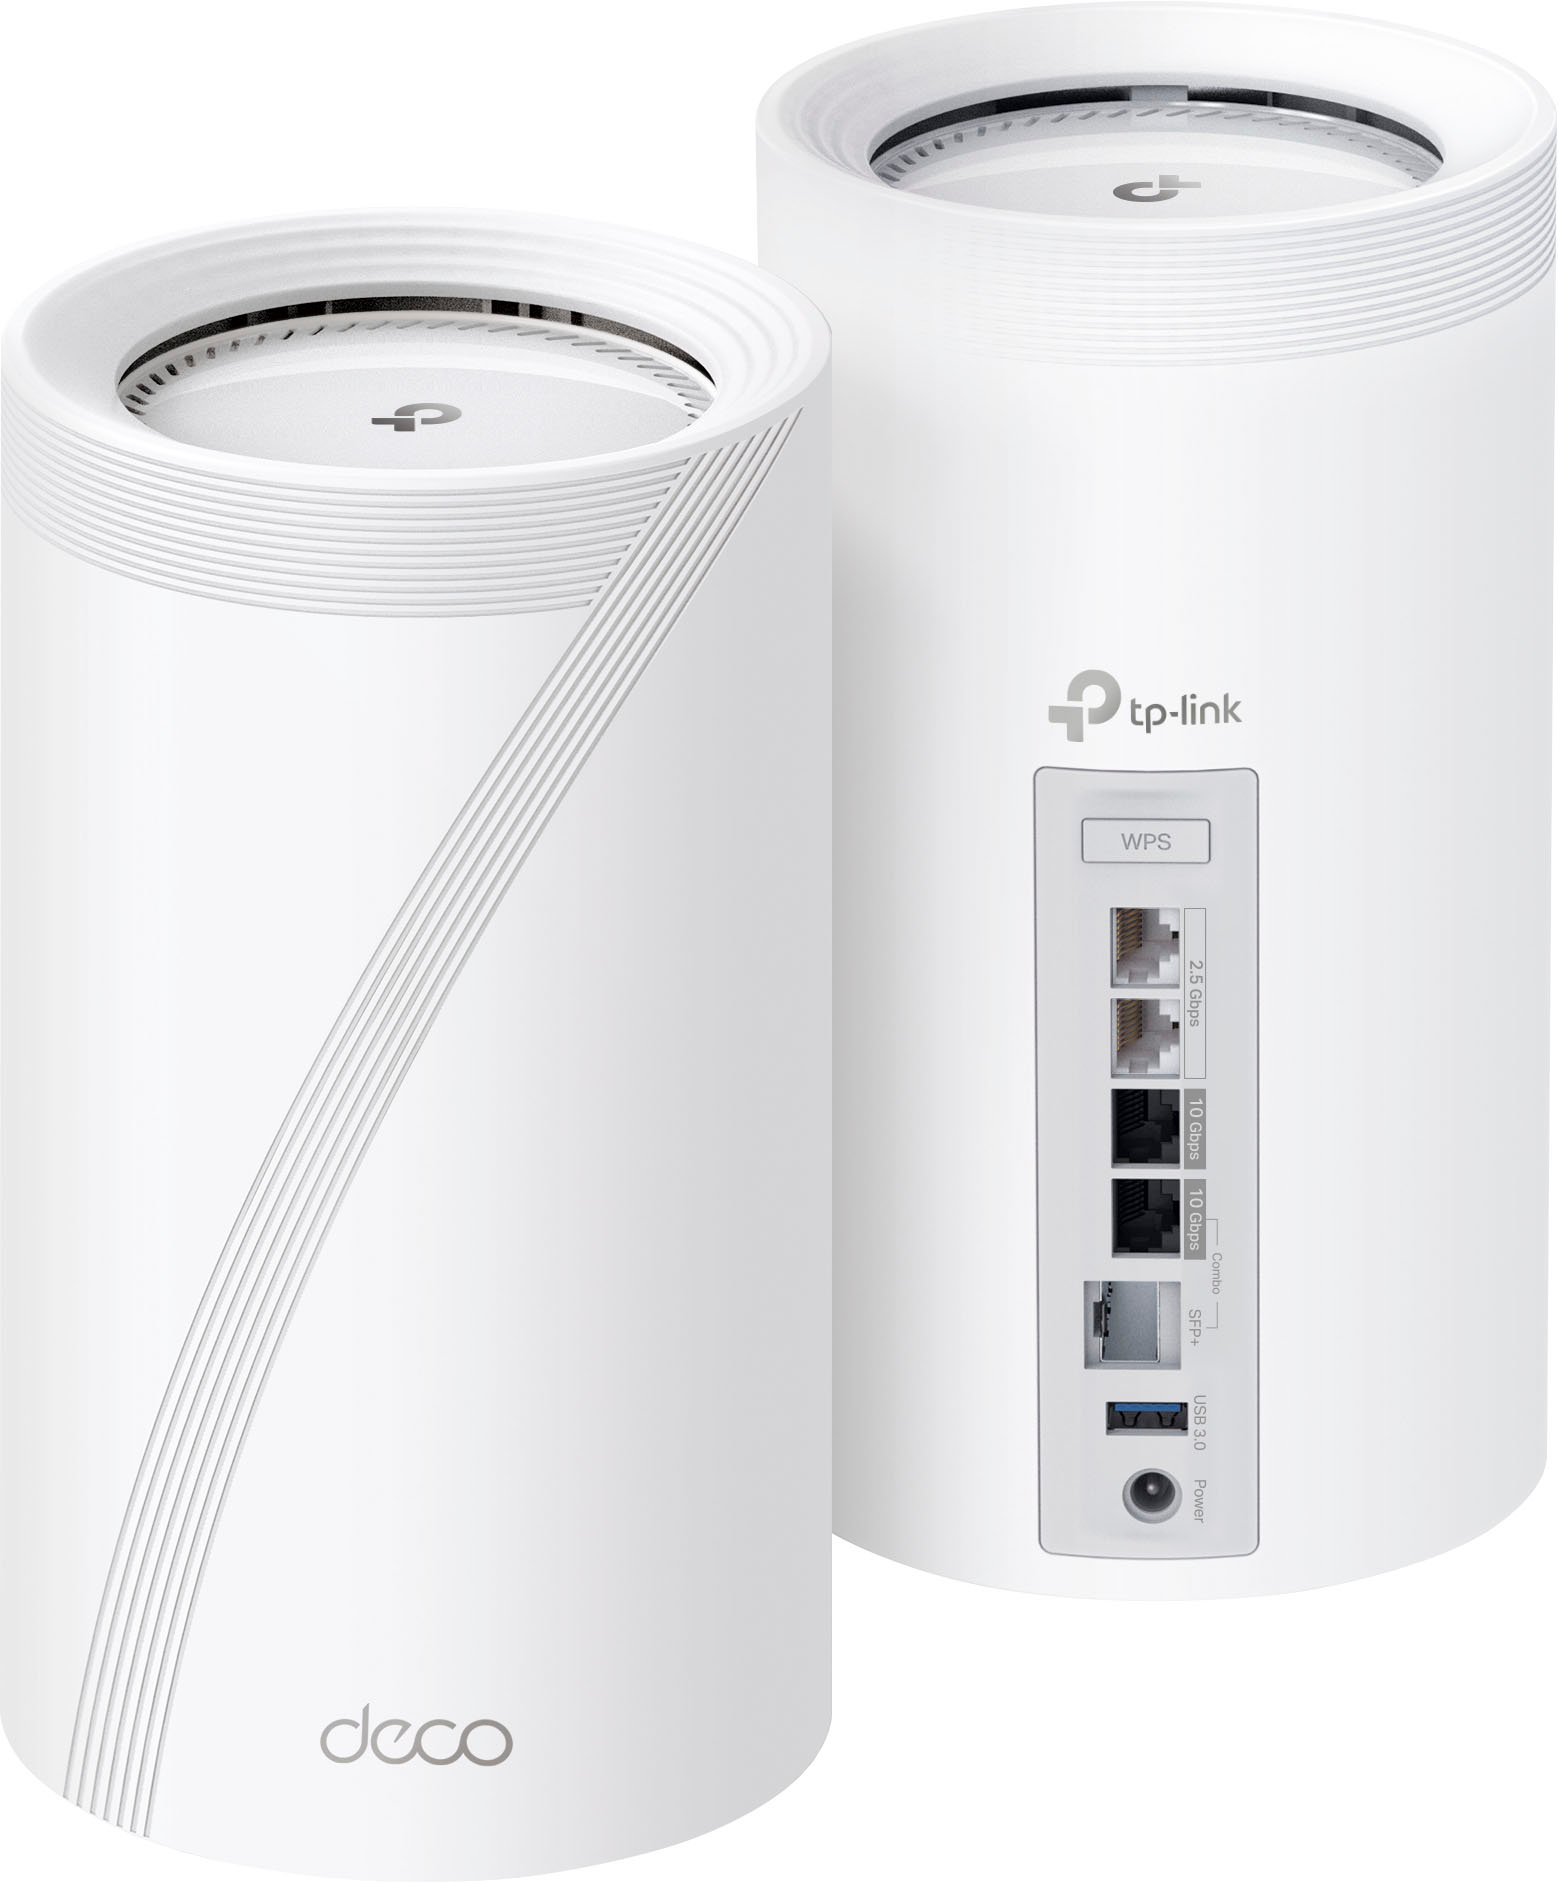 TP-Link Deco P9 Review: Mesh Wi-Fi Made Easy